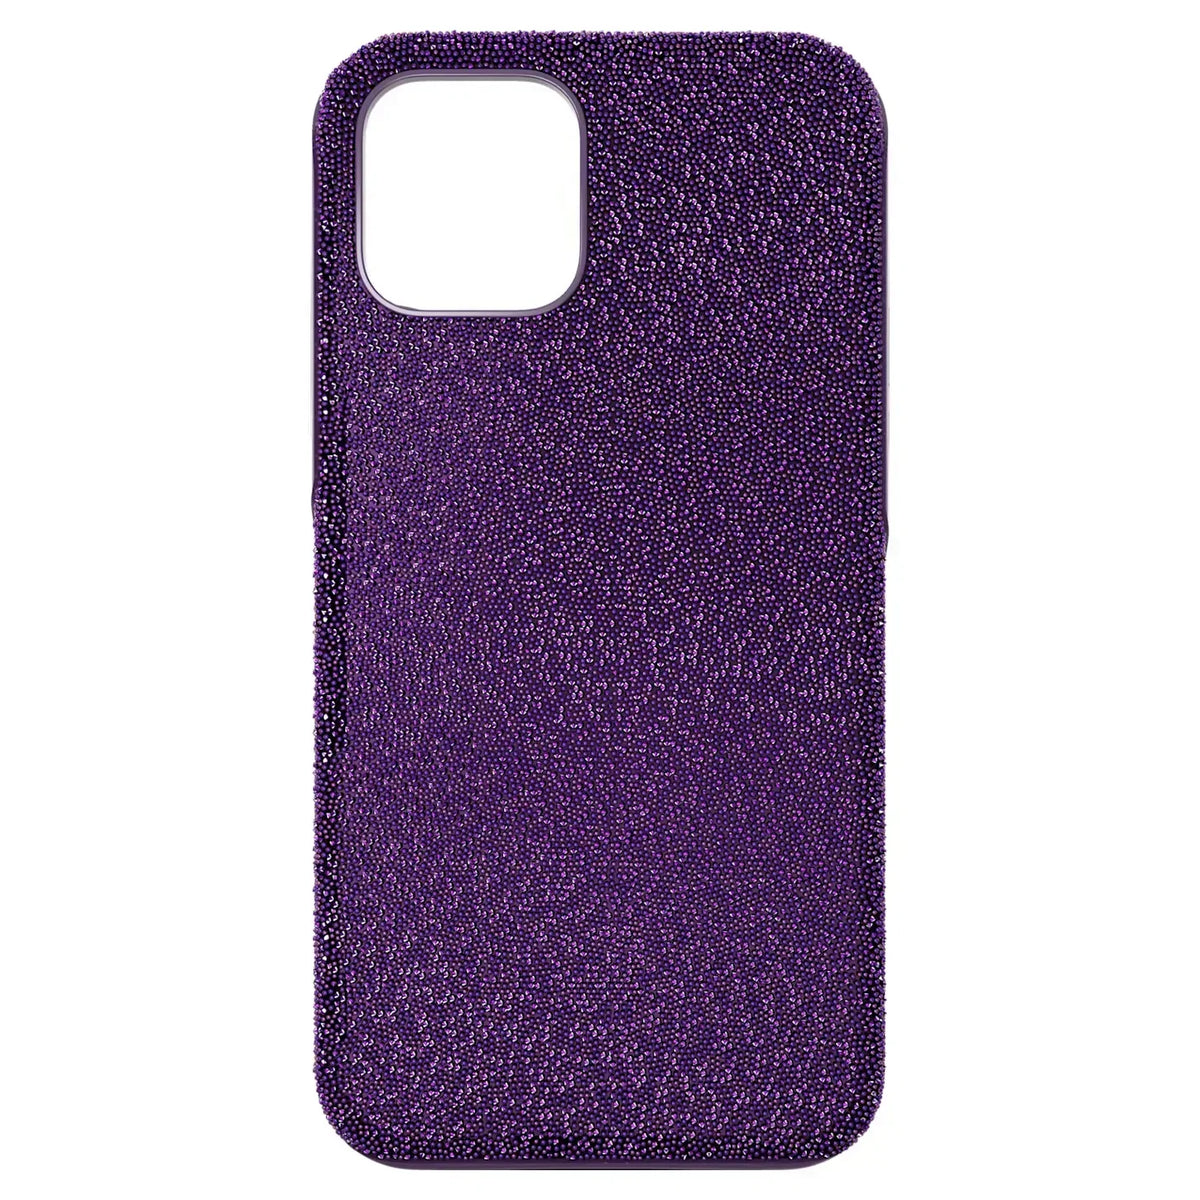 Glittery Crystal Back Cover for iPhone 13 Pro Max, Polycarbonate Back Case of Gleaming Colored Crystals